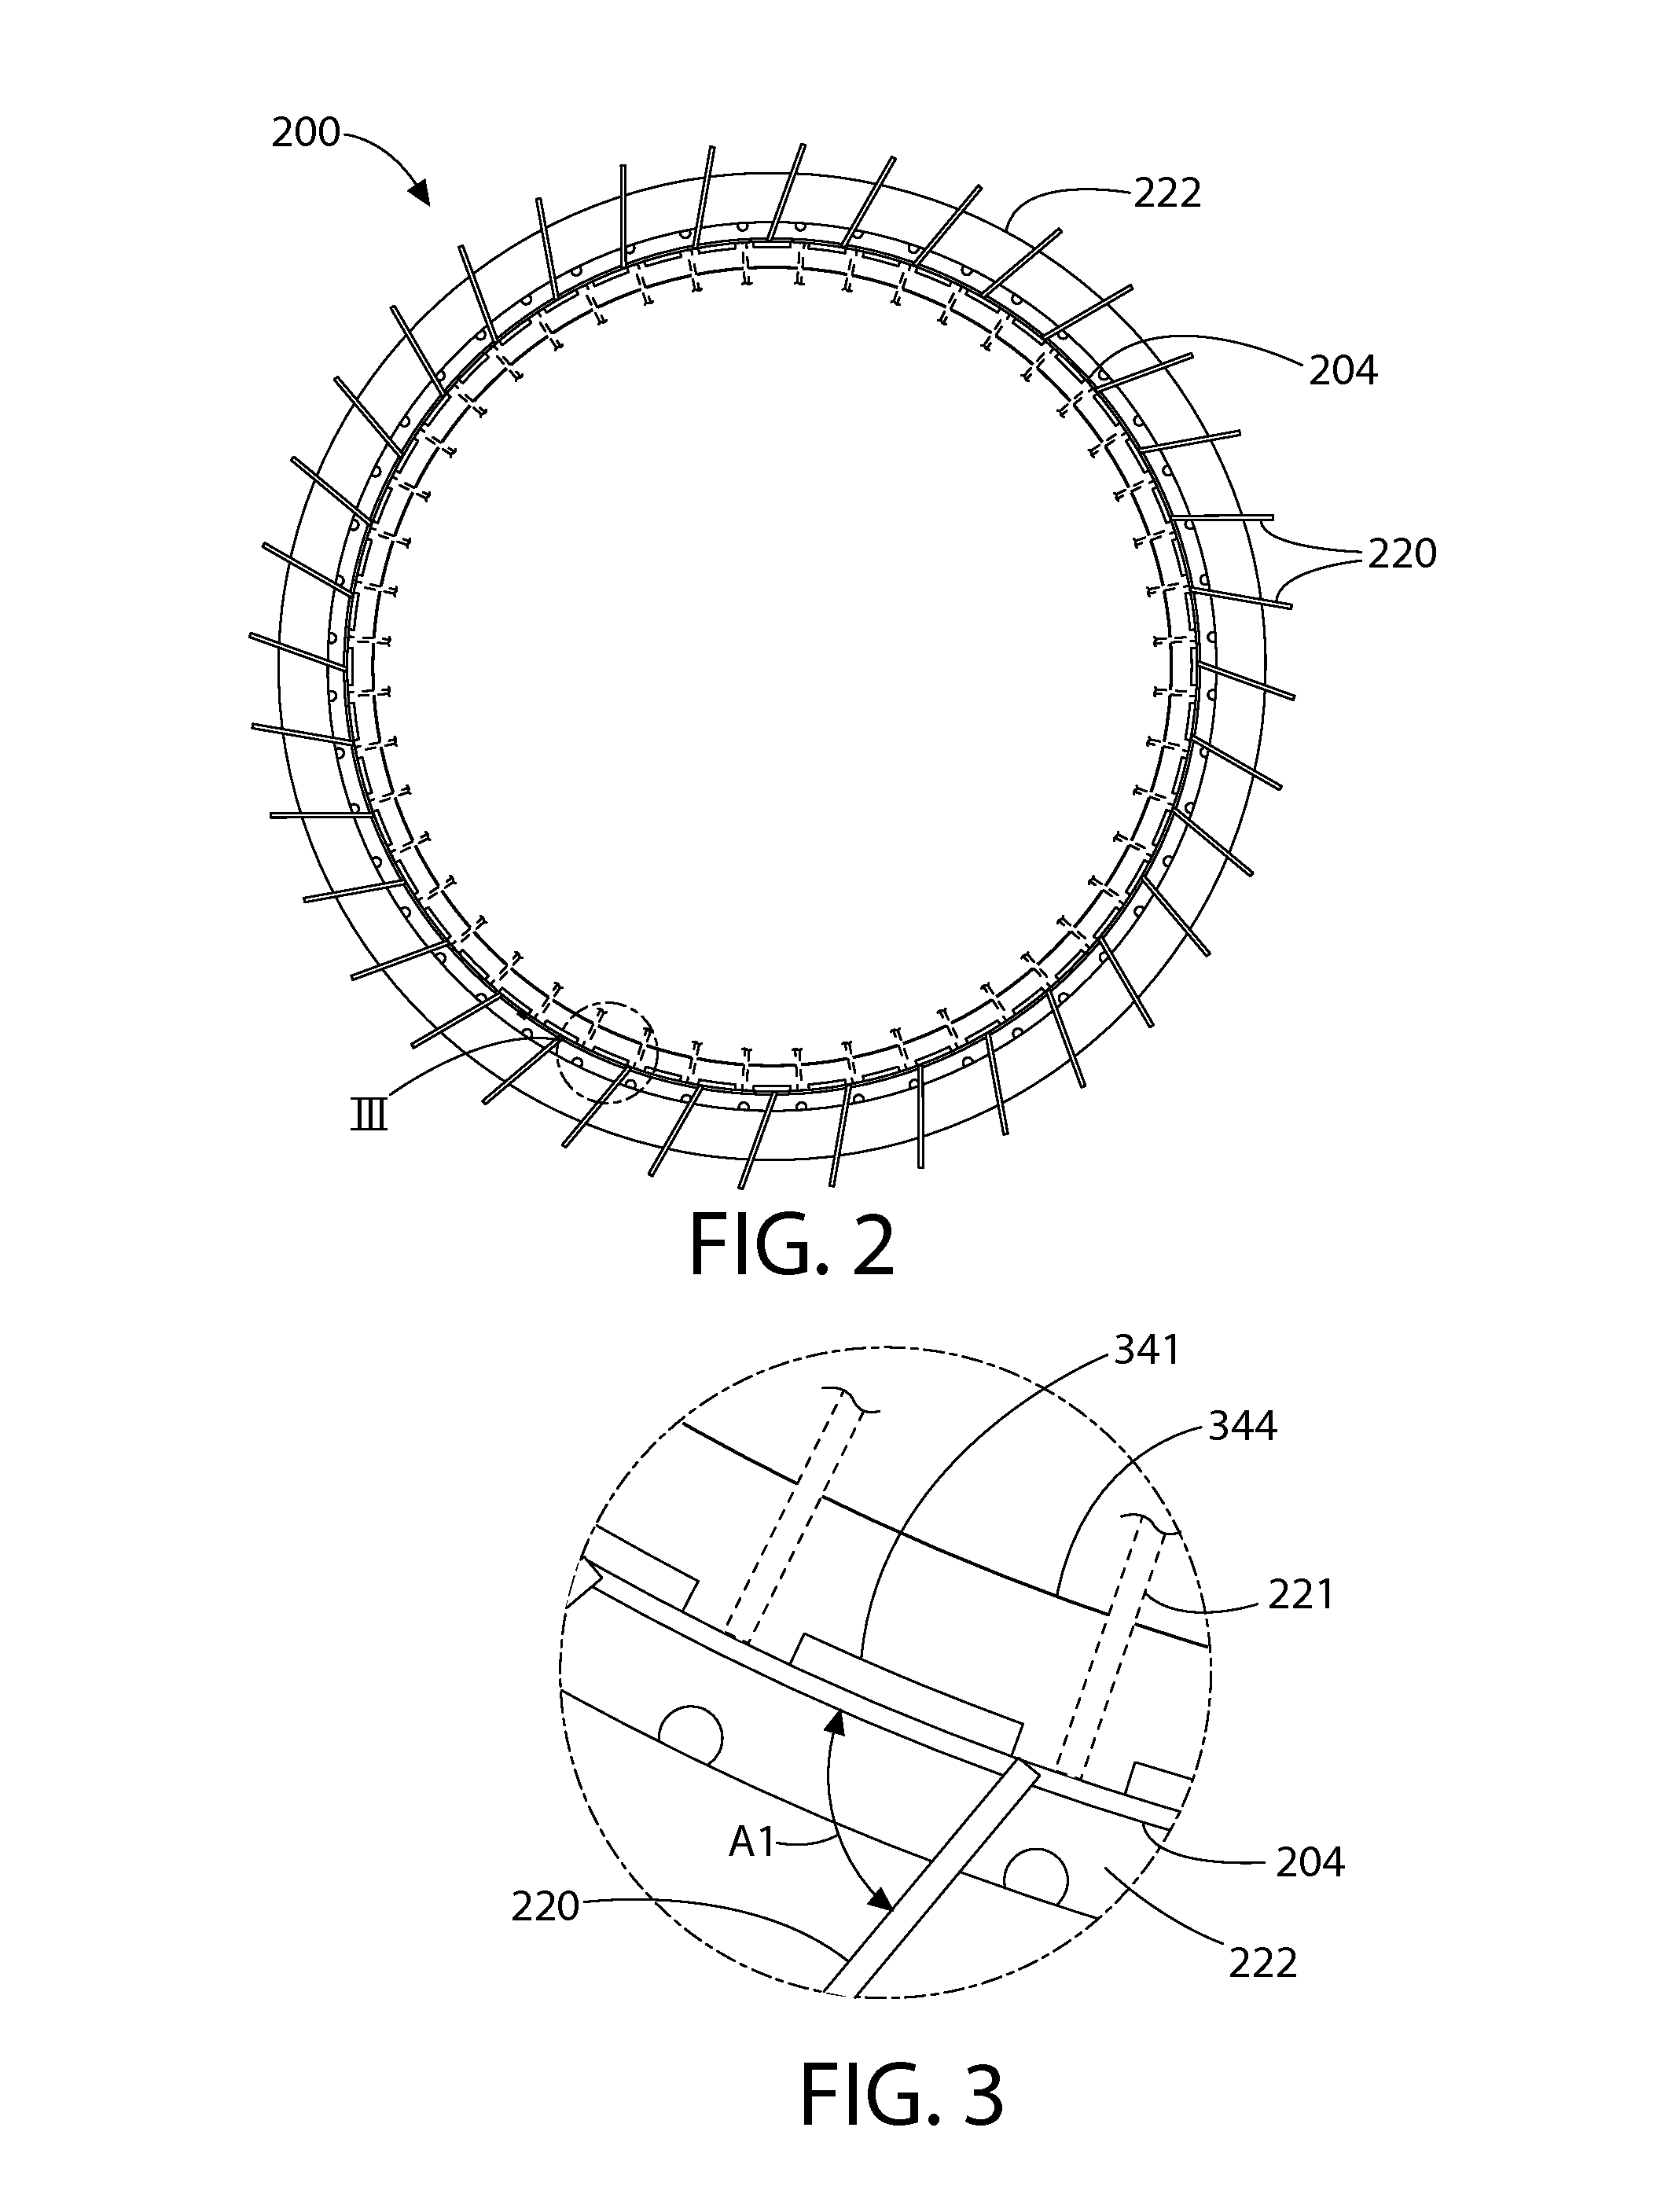 Loss-of-coolant accident reactor cooling system